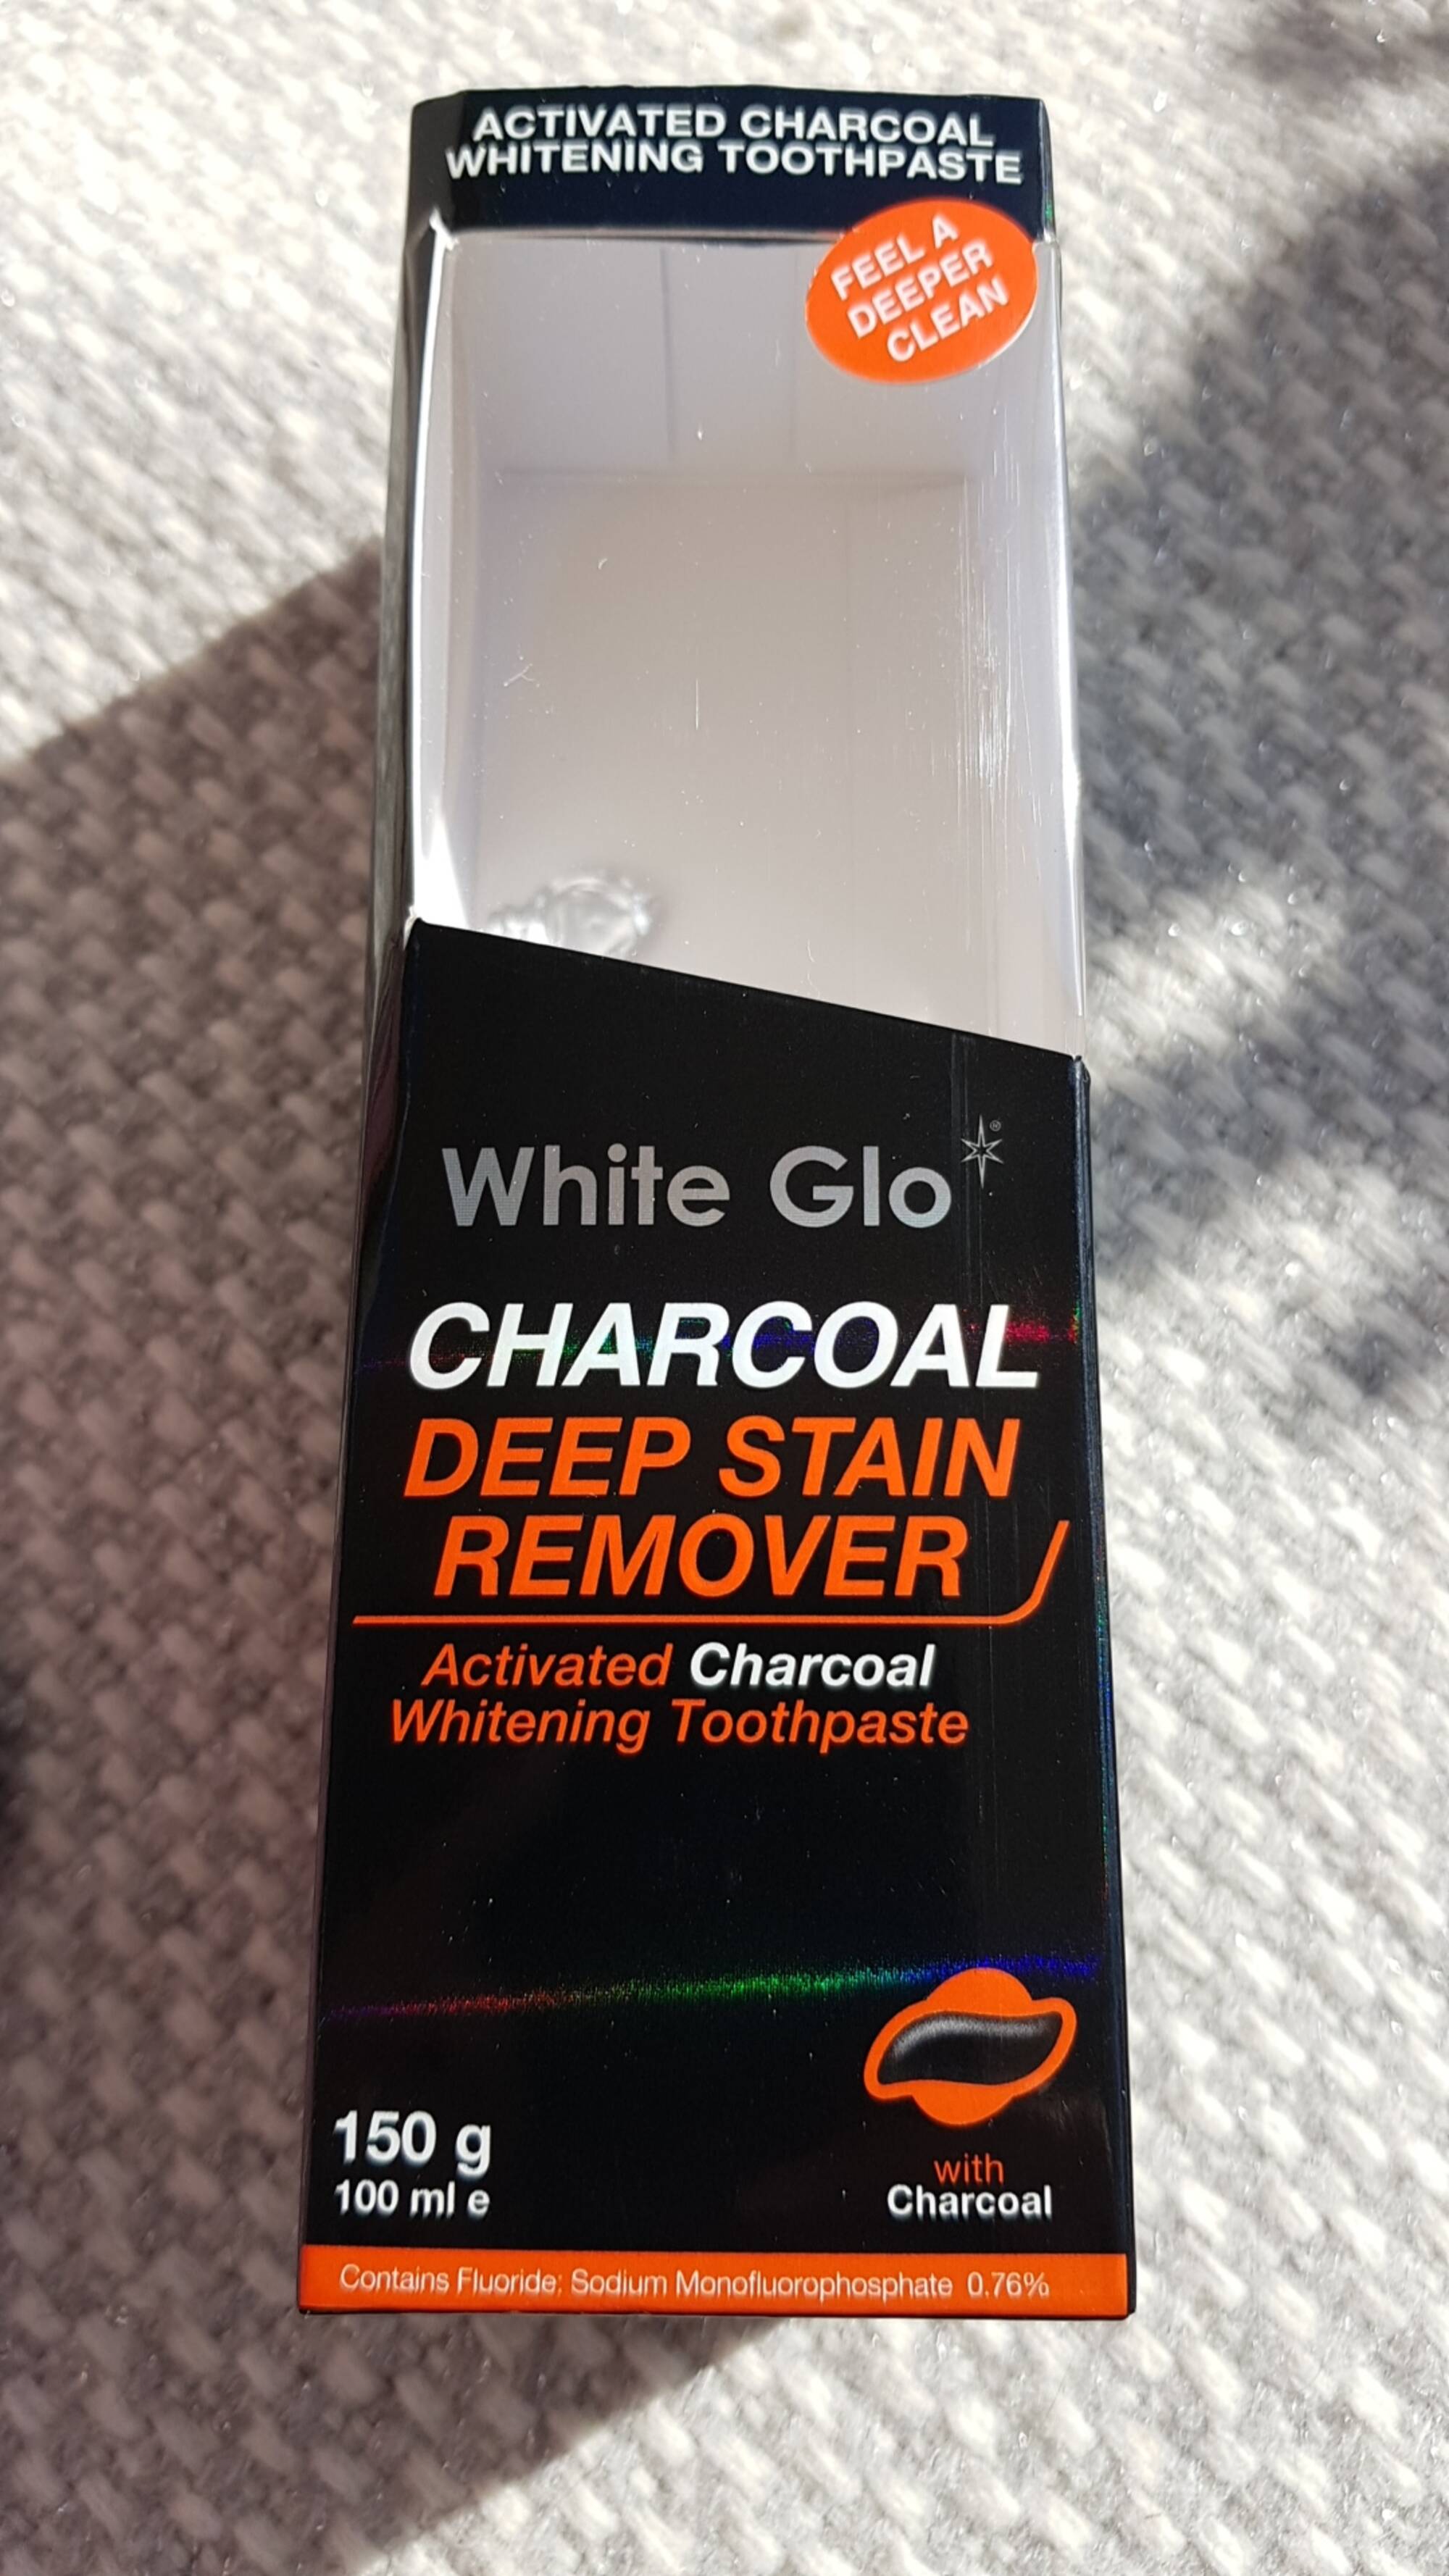 WHITE GLO - Charcoal deep stain remover -  Whitening toothpaste